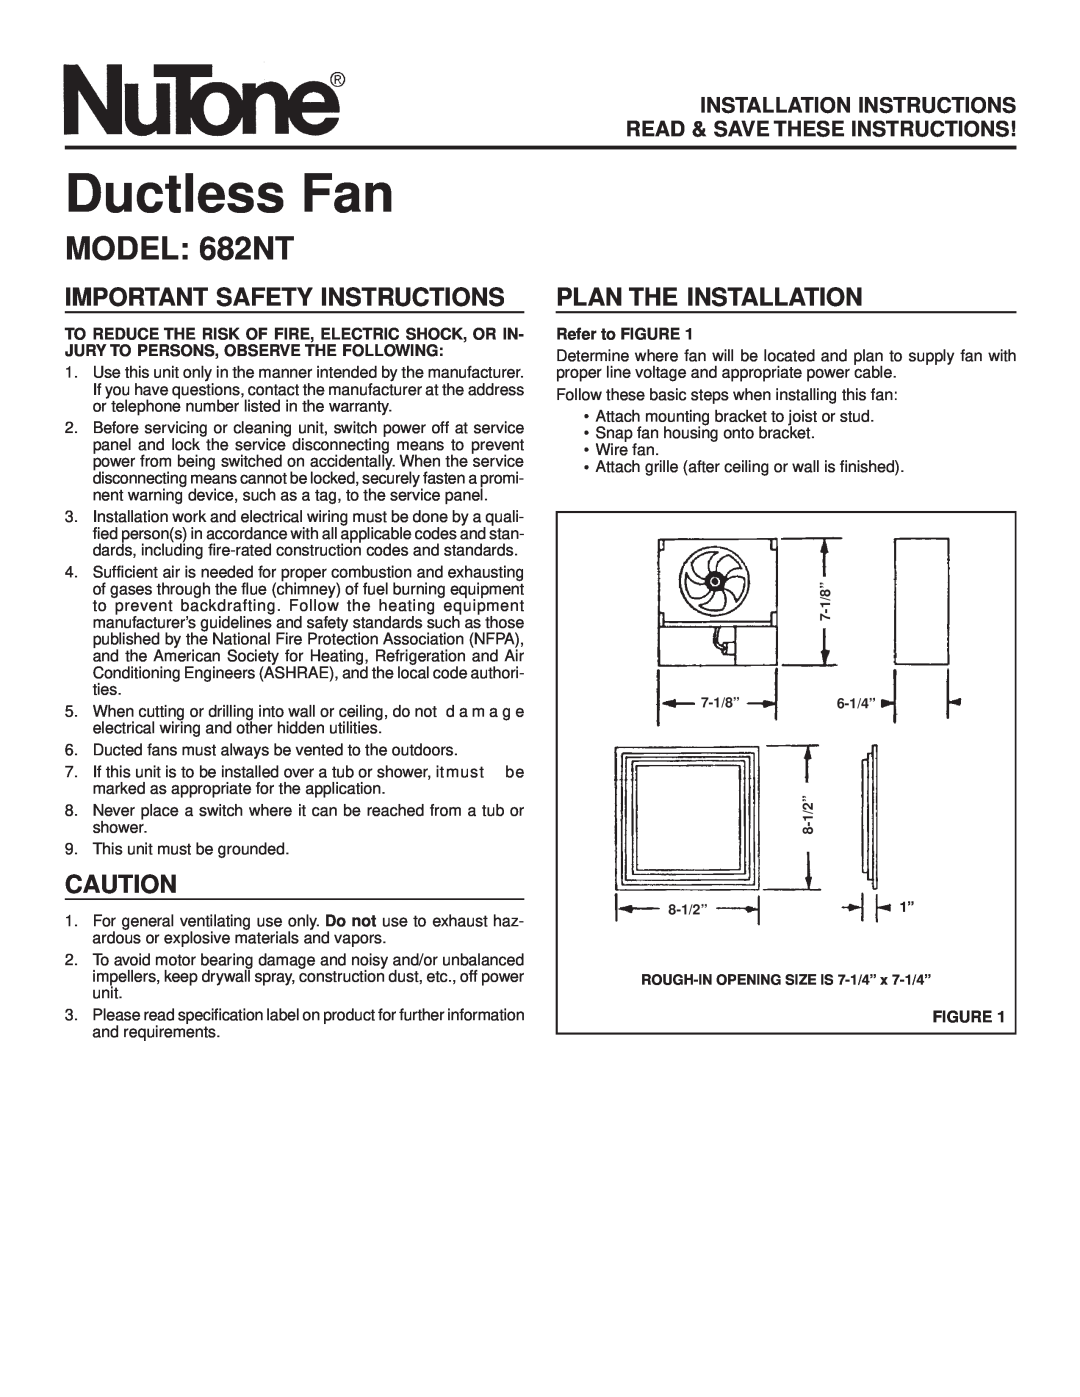 NuTone important safety instructions Ductless Fan, MODEL 682NT, Important Safety Instructions, Plan The Installation 